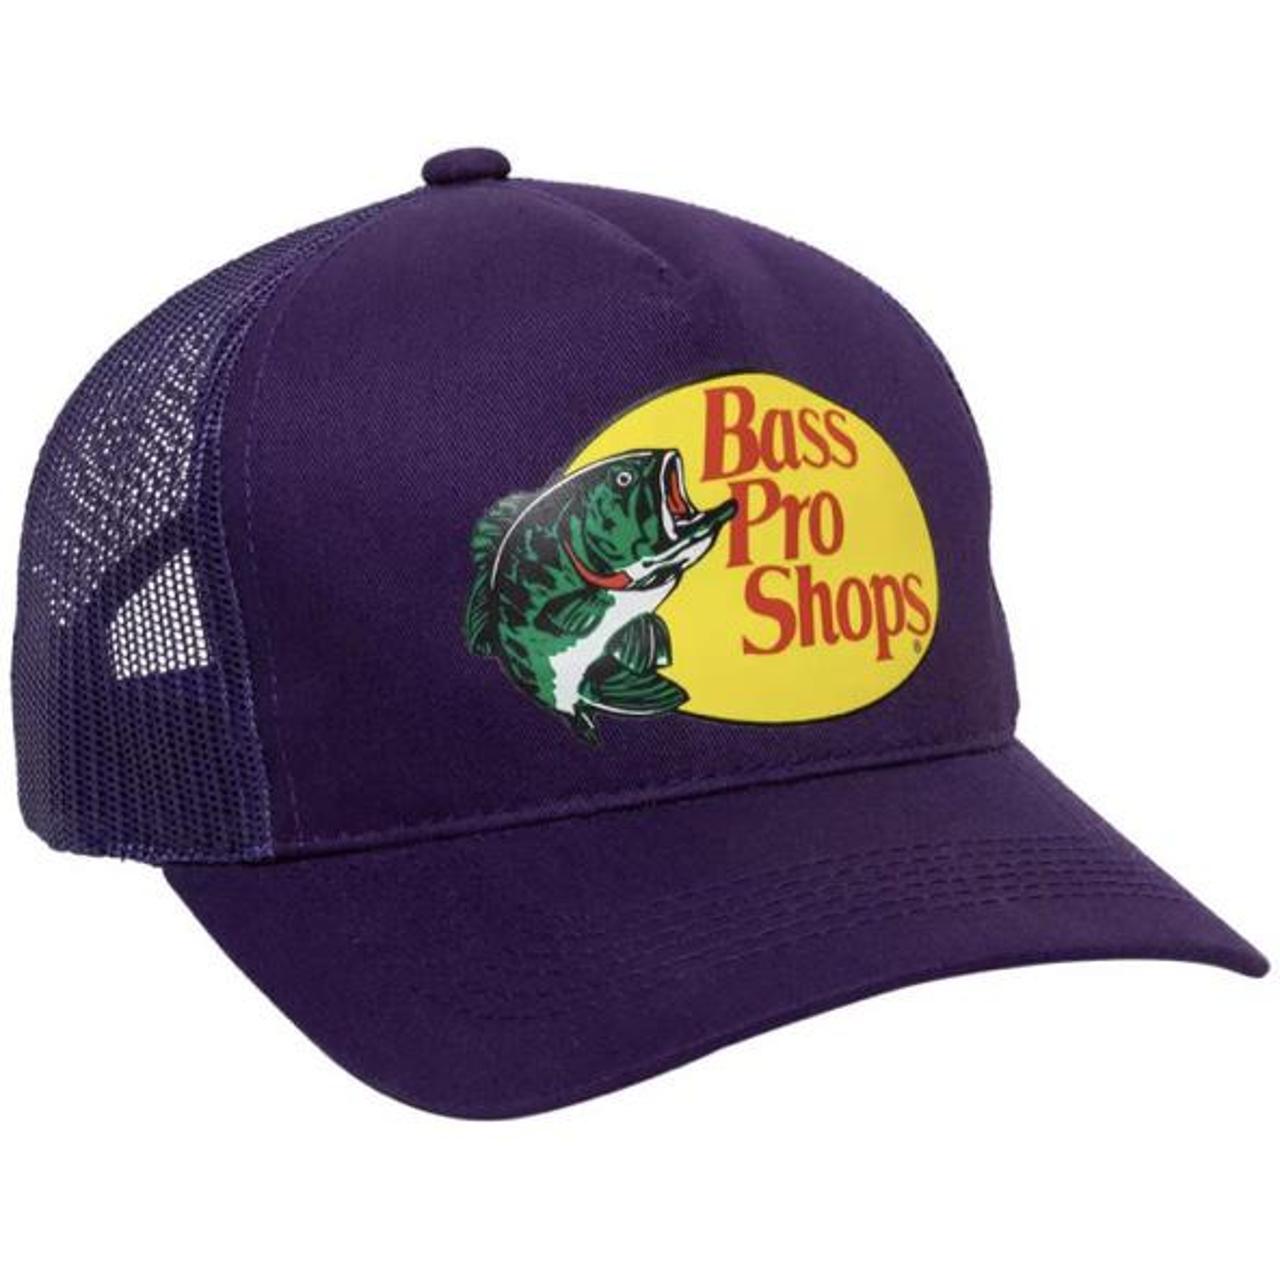 How a $6 Bass Pro Shops Hat Became a Fashion Trend - WSJ